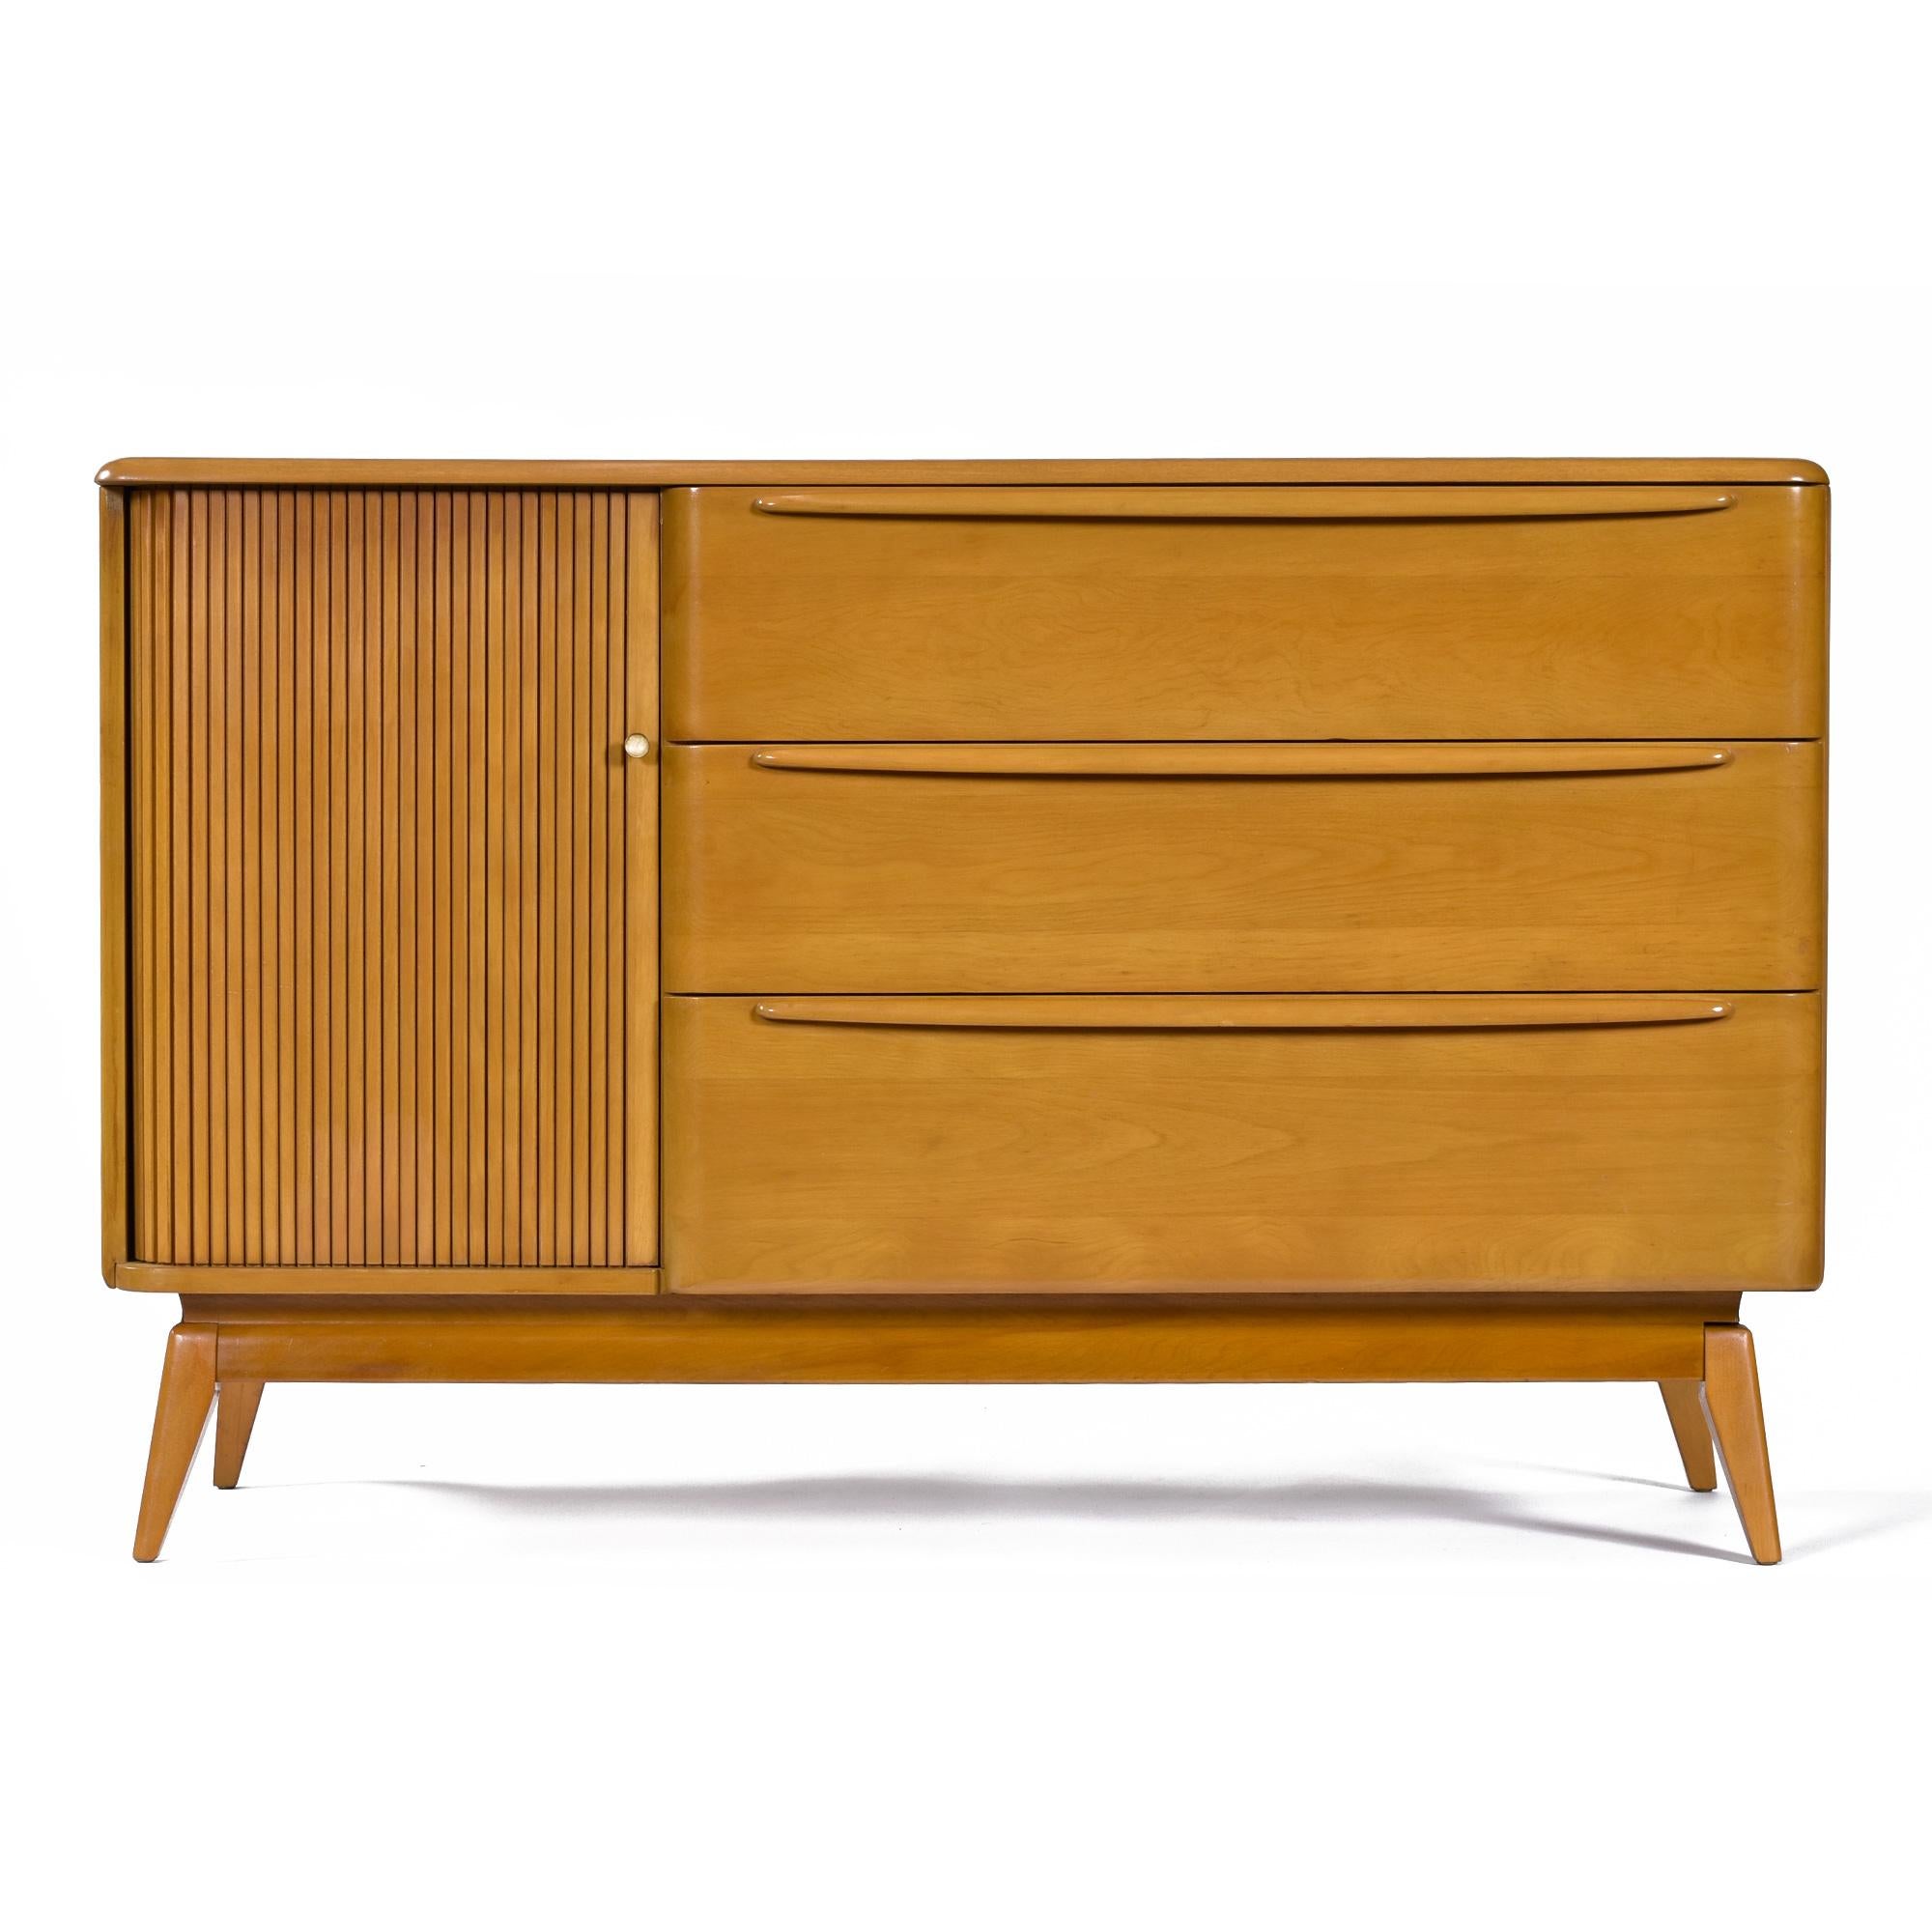 Versatility abounds with this Heywood Wakefield Model M-1542 Tambour Door Credenza.  Buffet, media cabinet, or entryway console are just a few ideas. As a dry bar, the adjustable / removable shelf will allow you to keep that whiskey collection cozy.